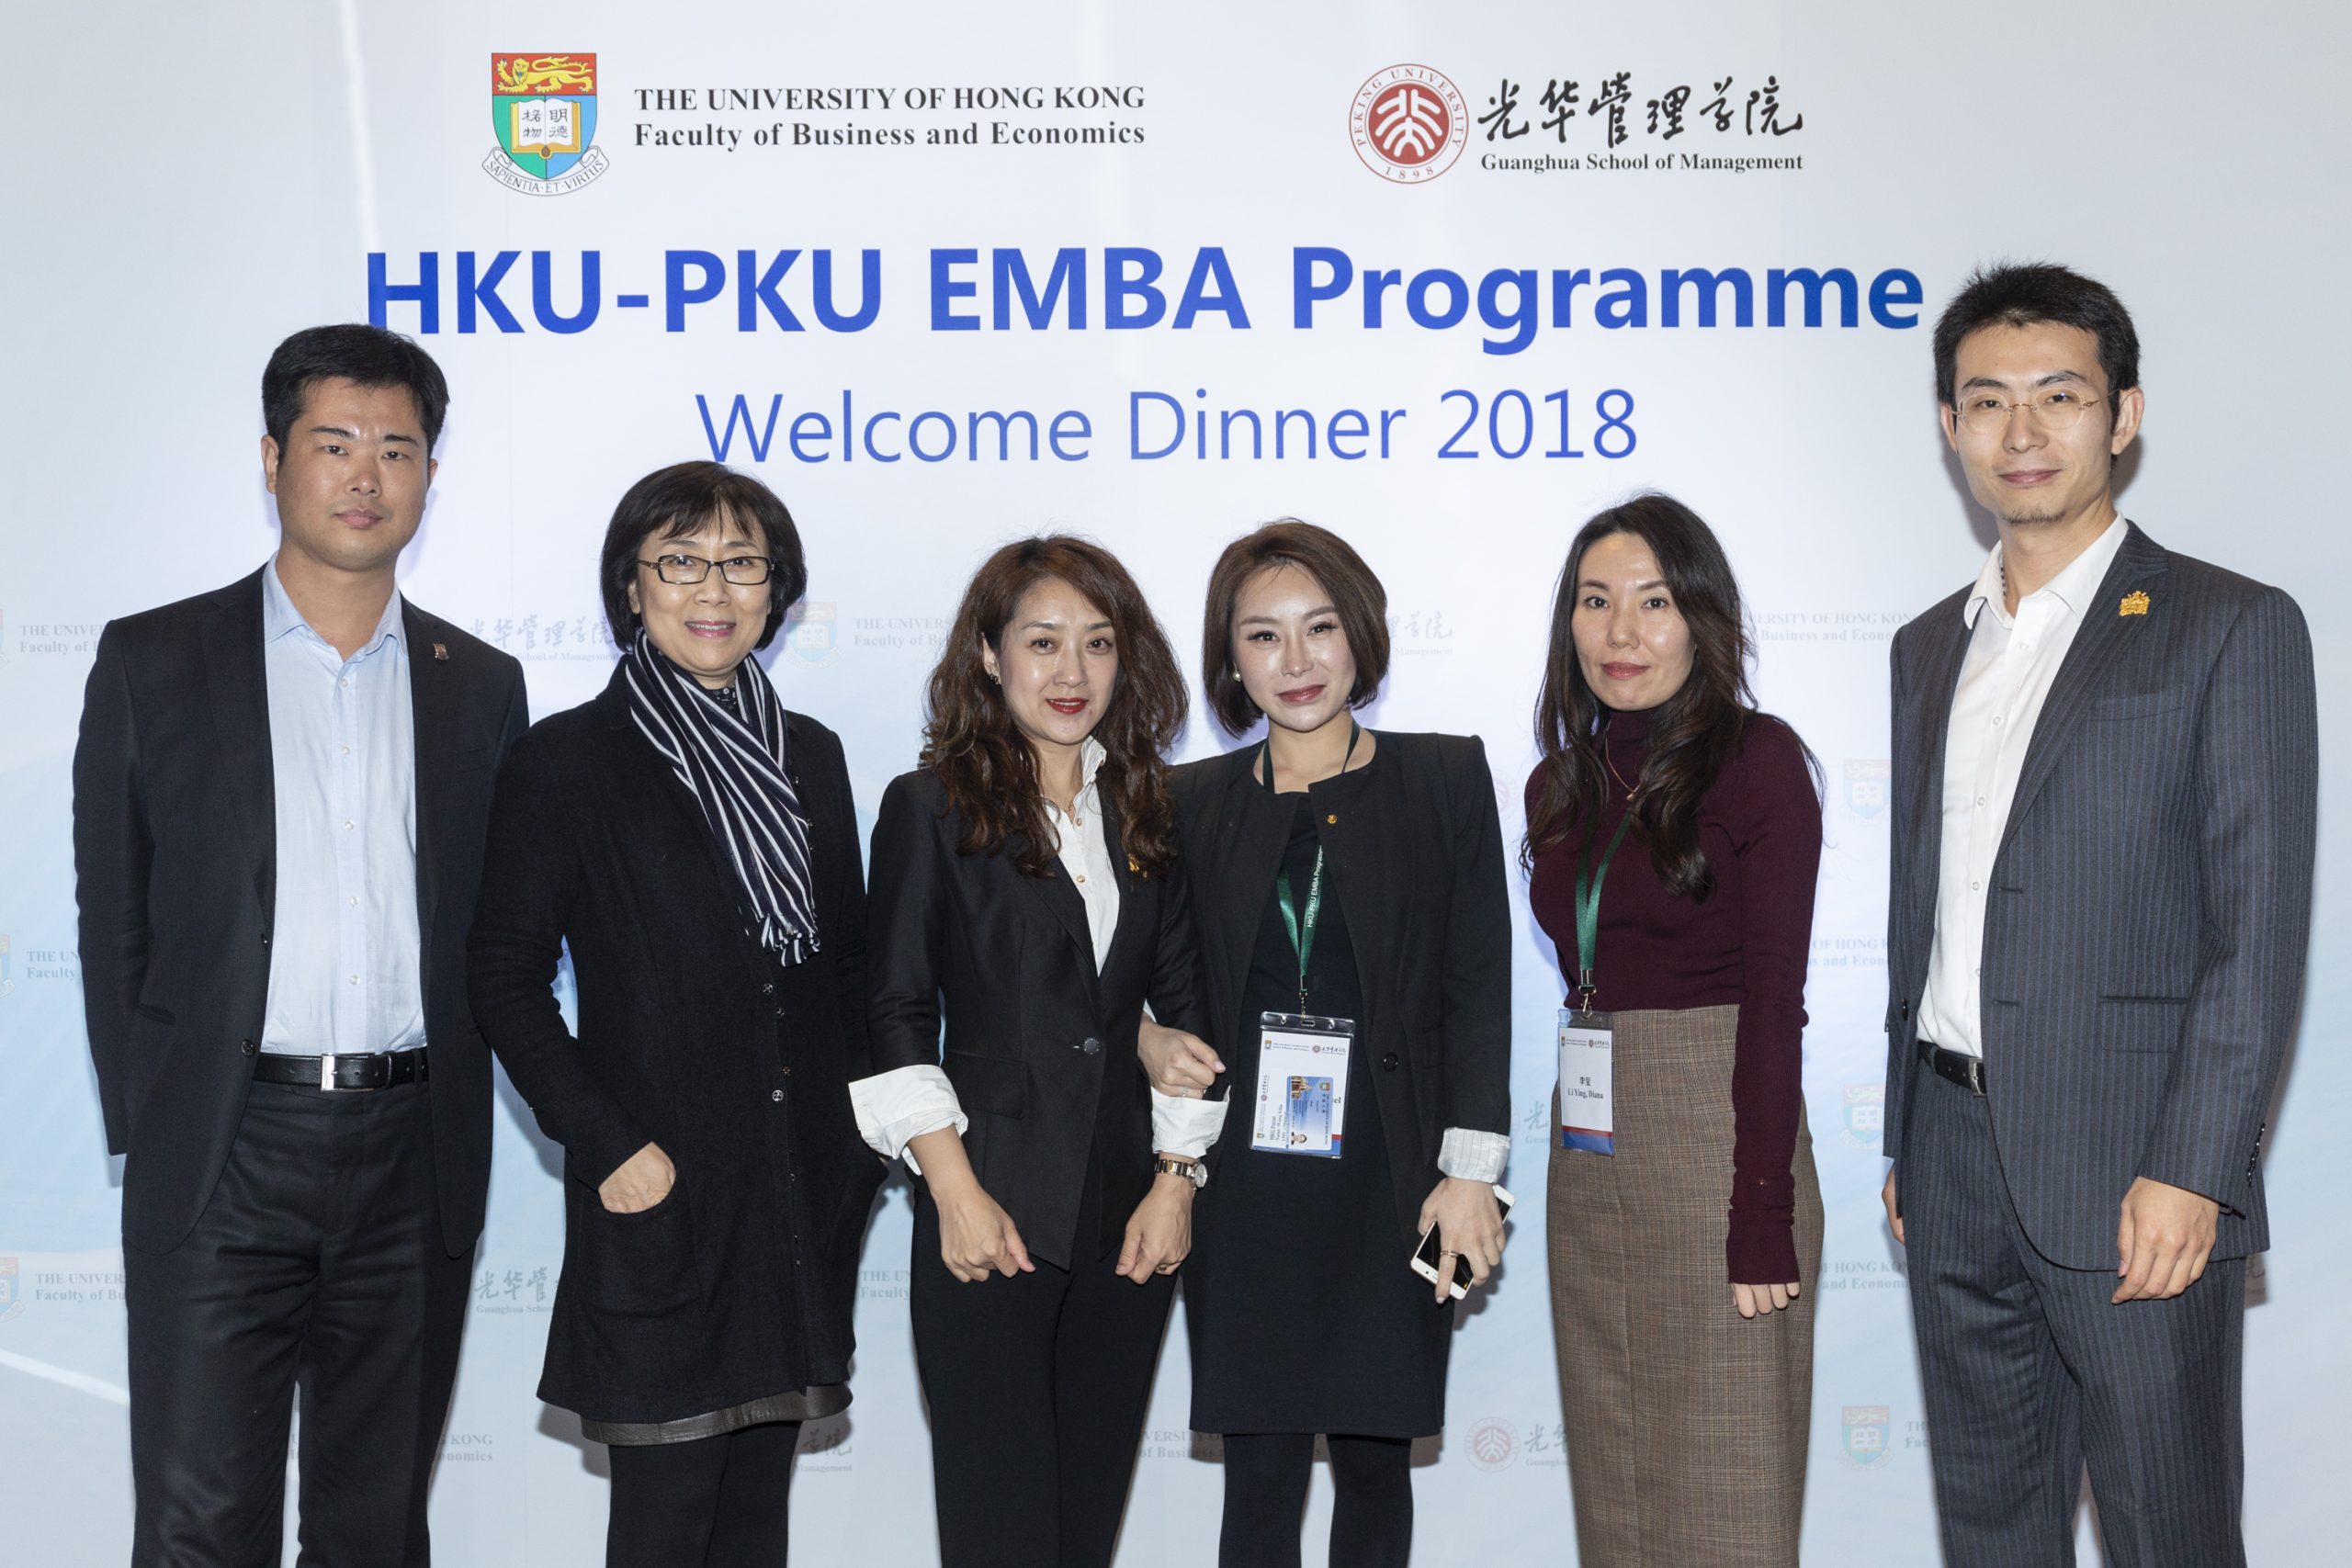 HKU EMBA programme launched in collaboration with Guanghua School of Management of Peking University